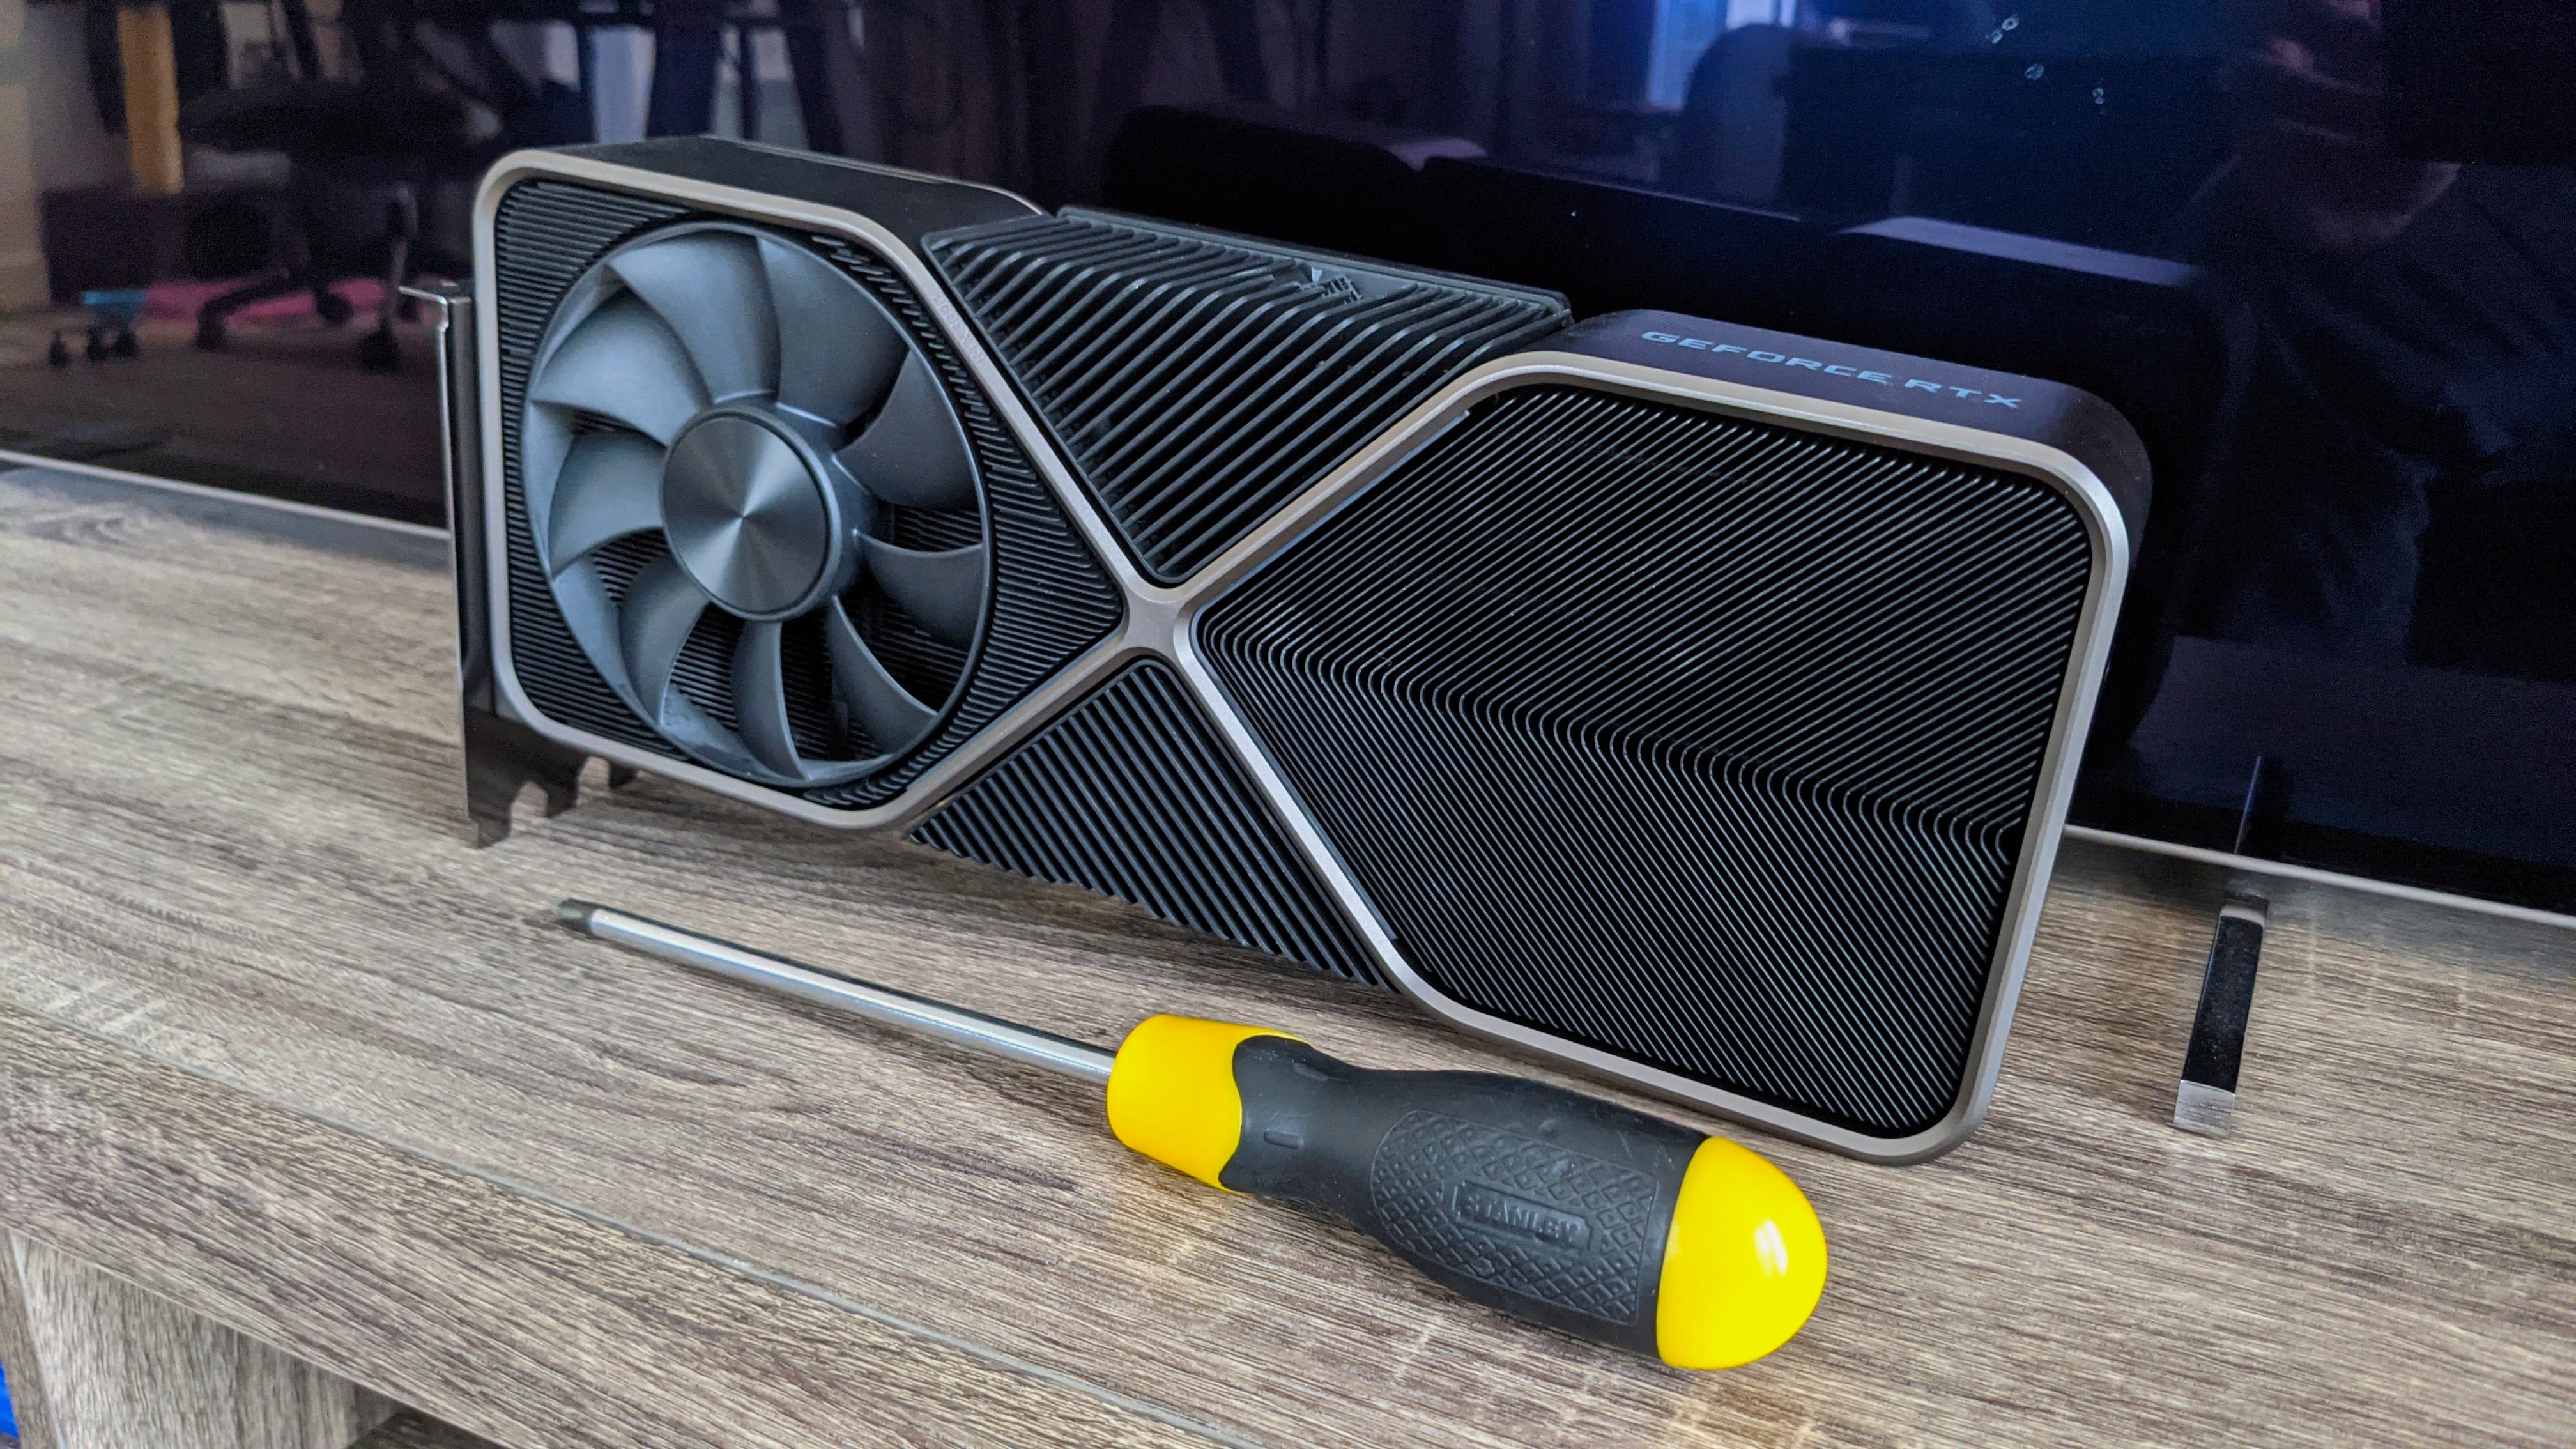 An Nvidia GeForce RTX 3090 Founders Edition on a table, next to a screwdriver.